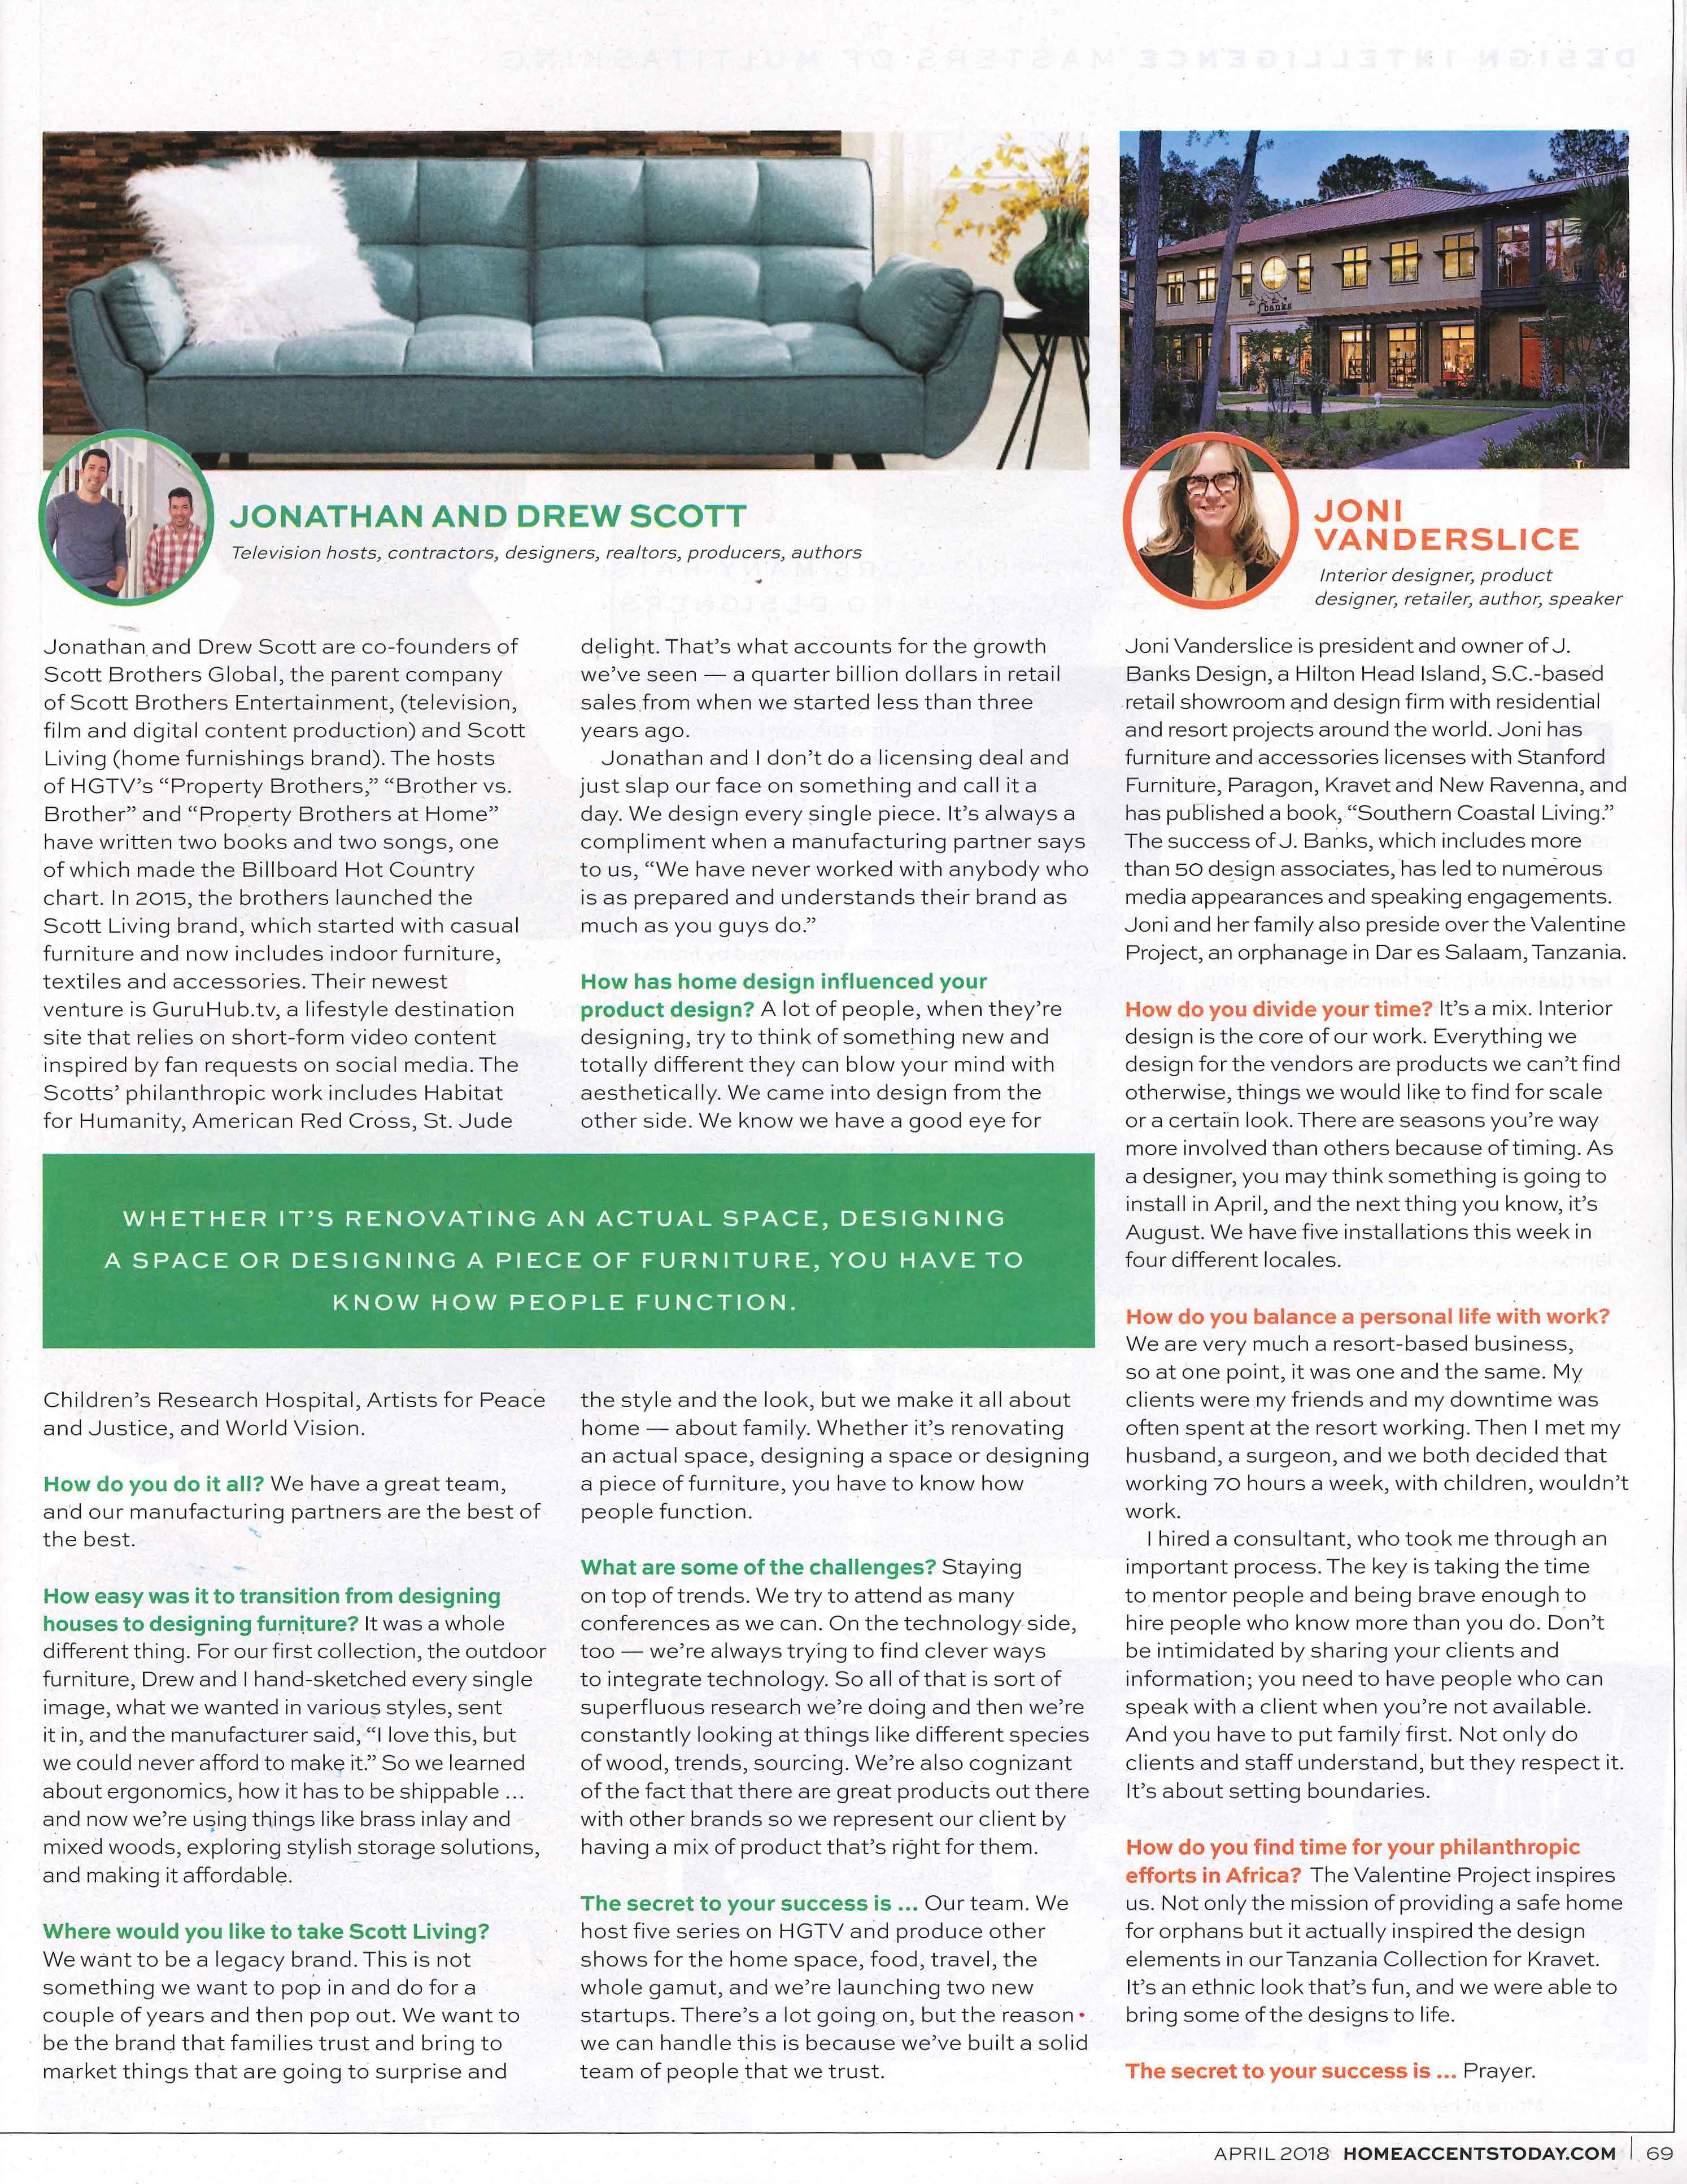 Joni Vanderslice interviewed by Home Accents Today magazine about her varied talents